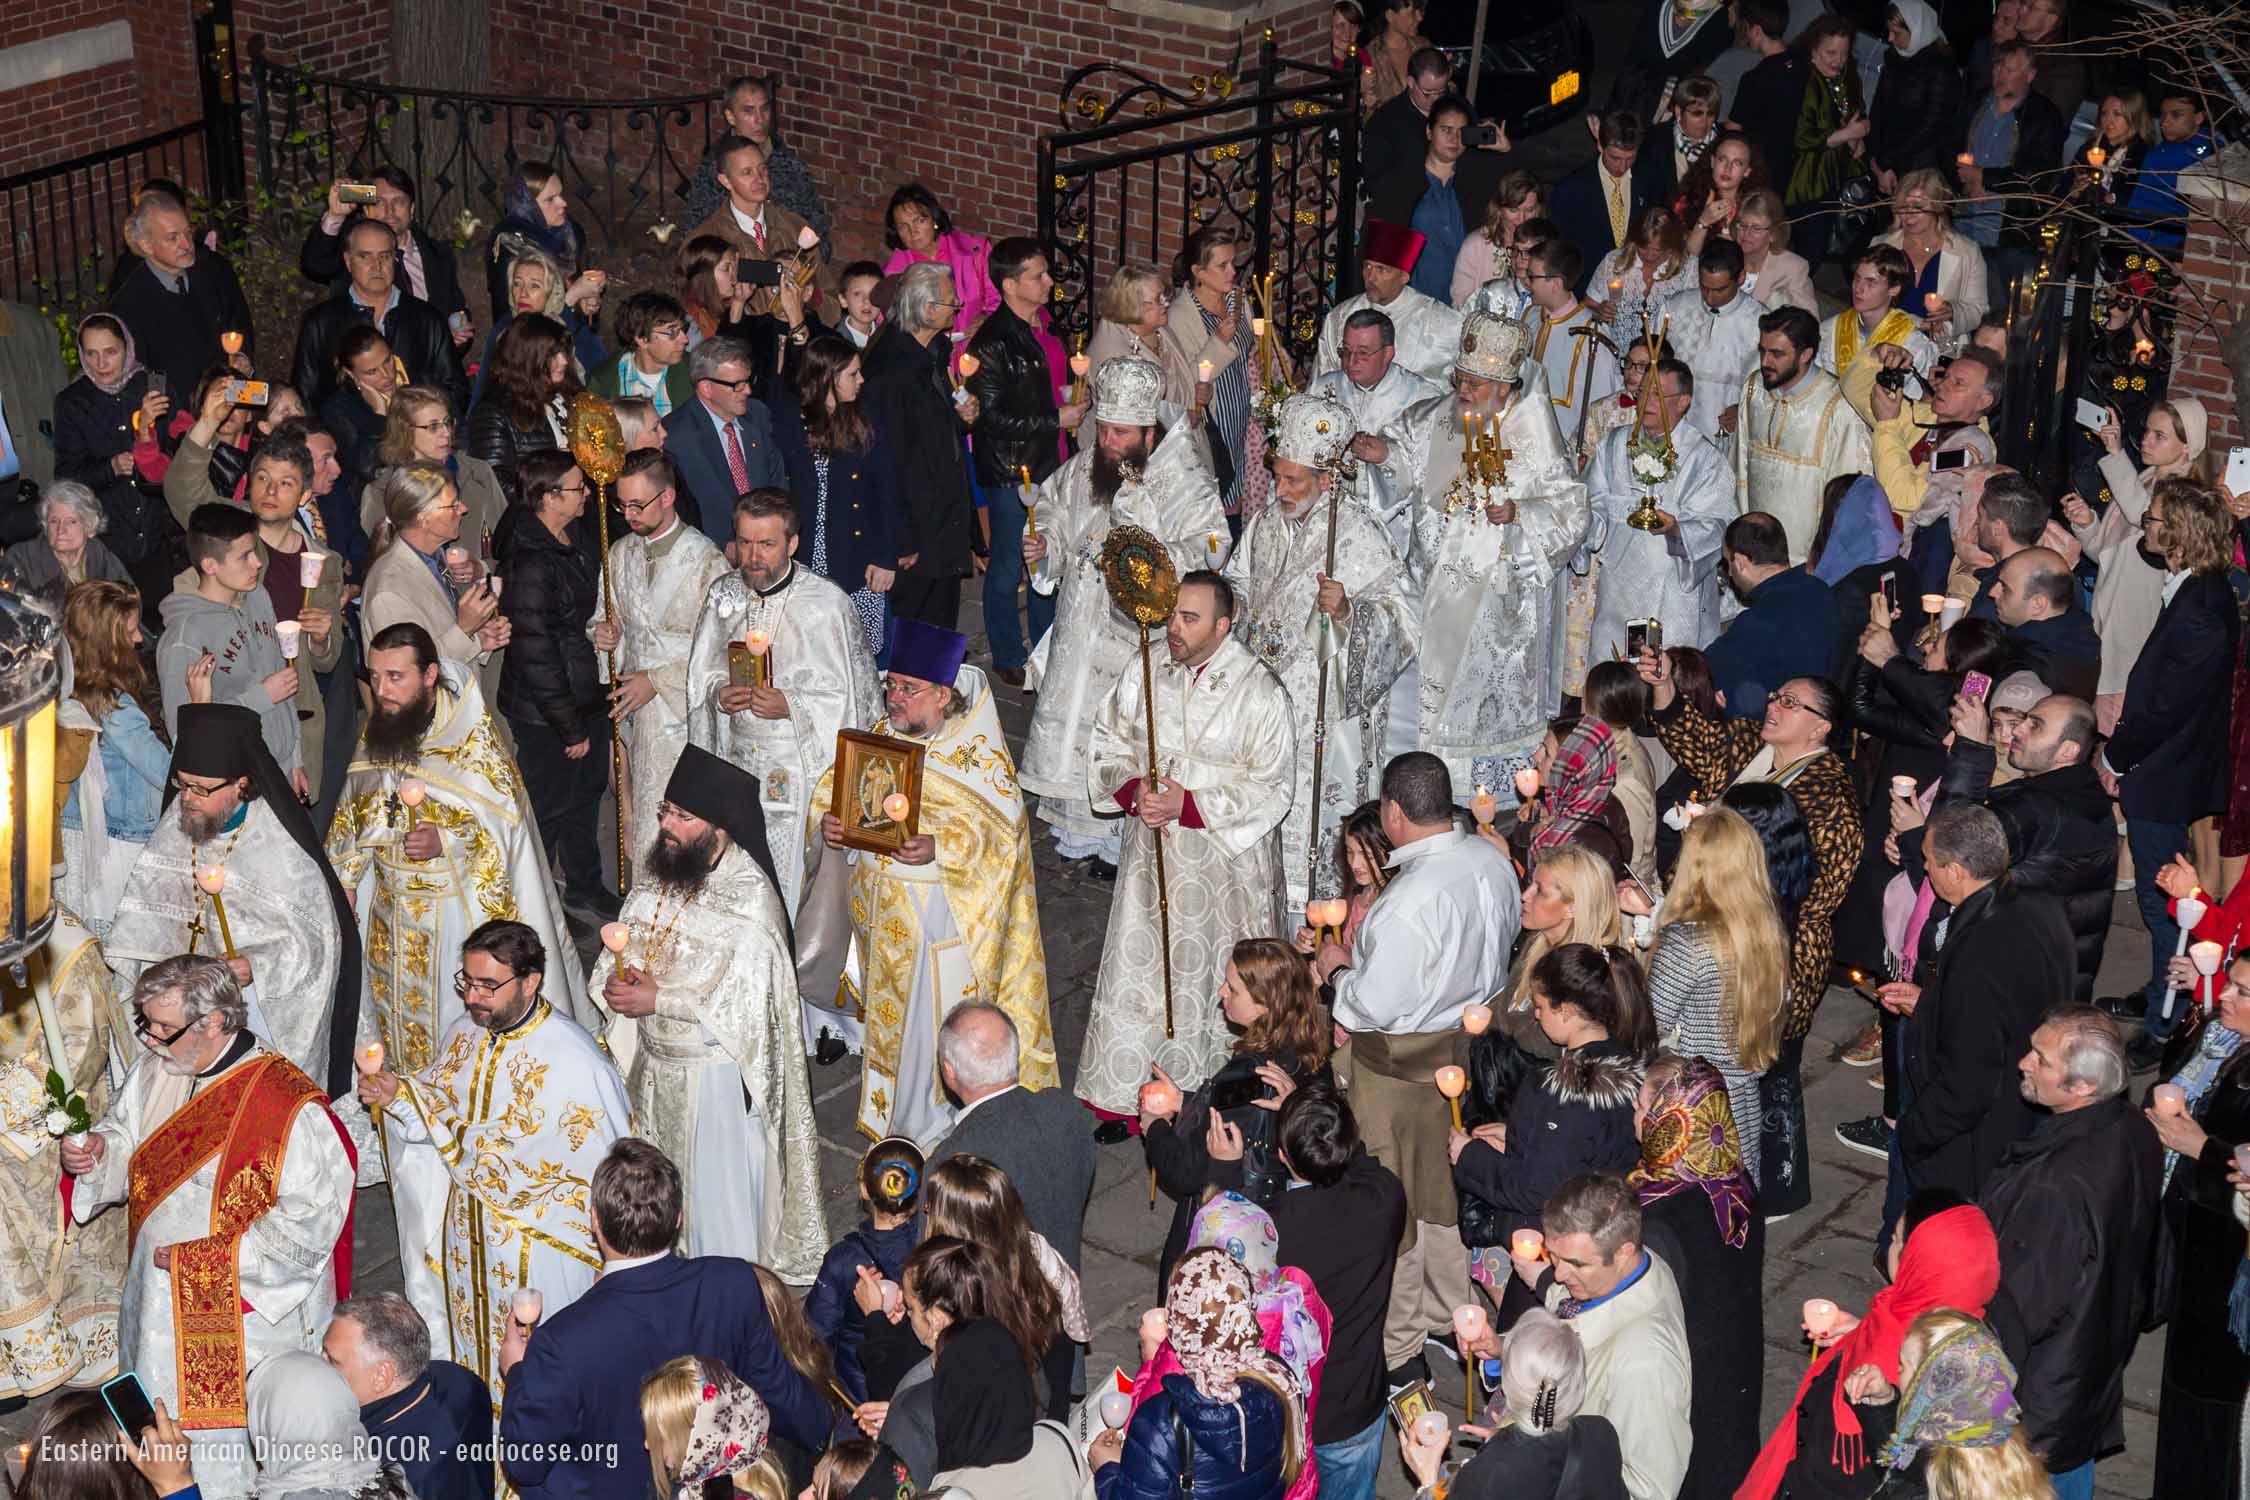 New York City: Metropolitan Hilarion leads Divine Services for Pascha in Synodal Cathedral